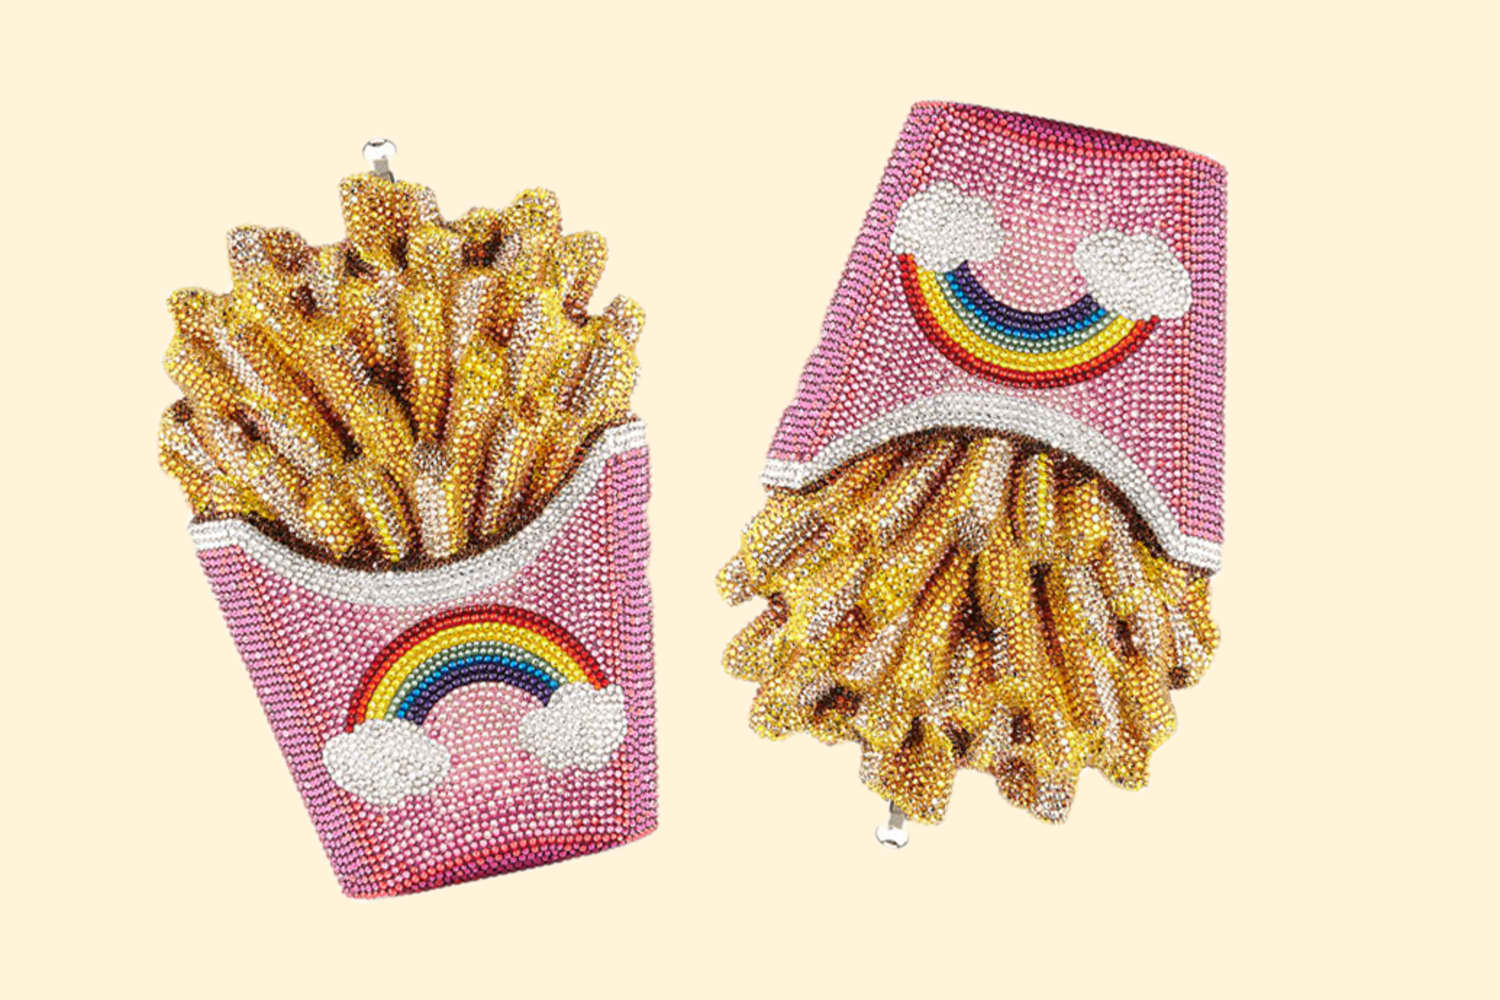 Judith Leiber French Fries Rainbow Clutch Bag - One-color